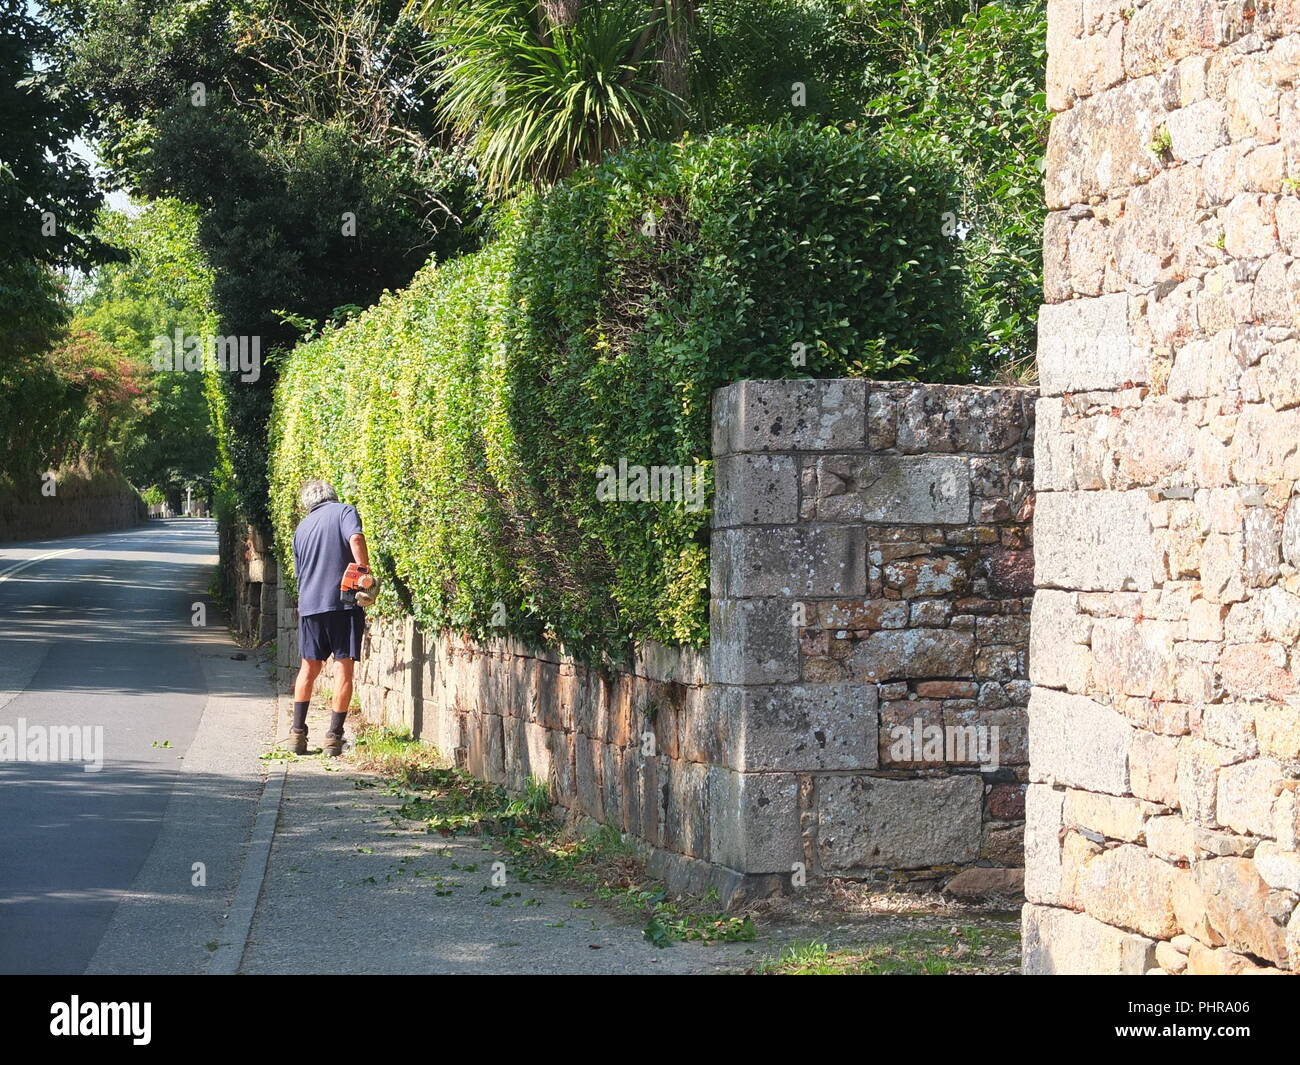 Branchage Jersey Channel Islands parishioner in the rural parish of St Ouen  cutting roadside hedge prior to biannual Branchage inspection Stock Photo -  Alamy